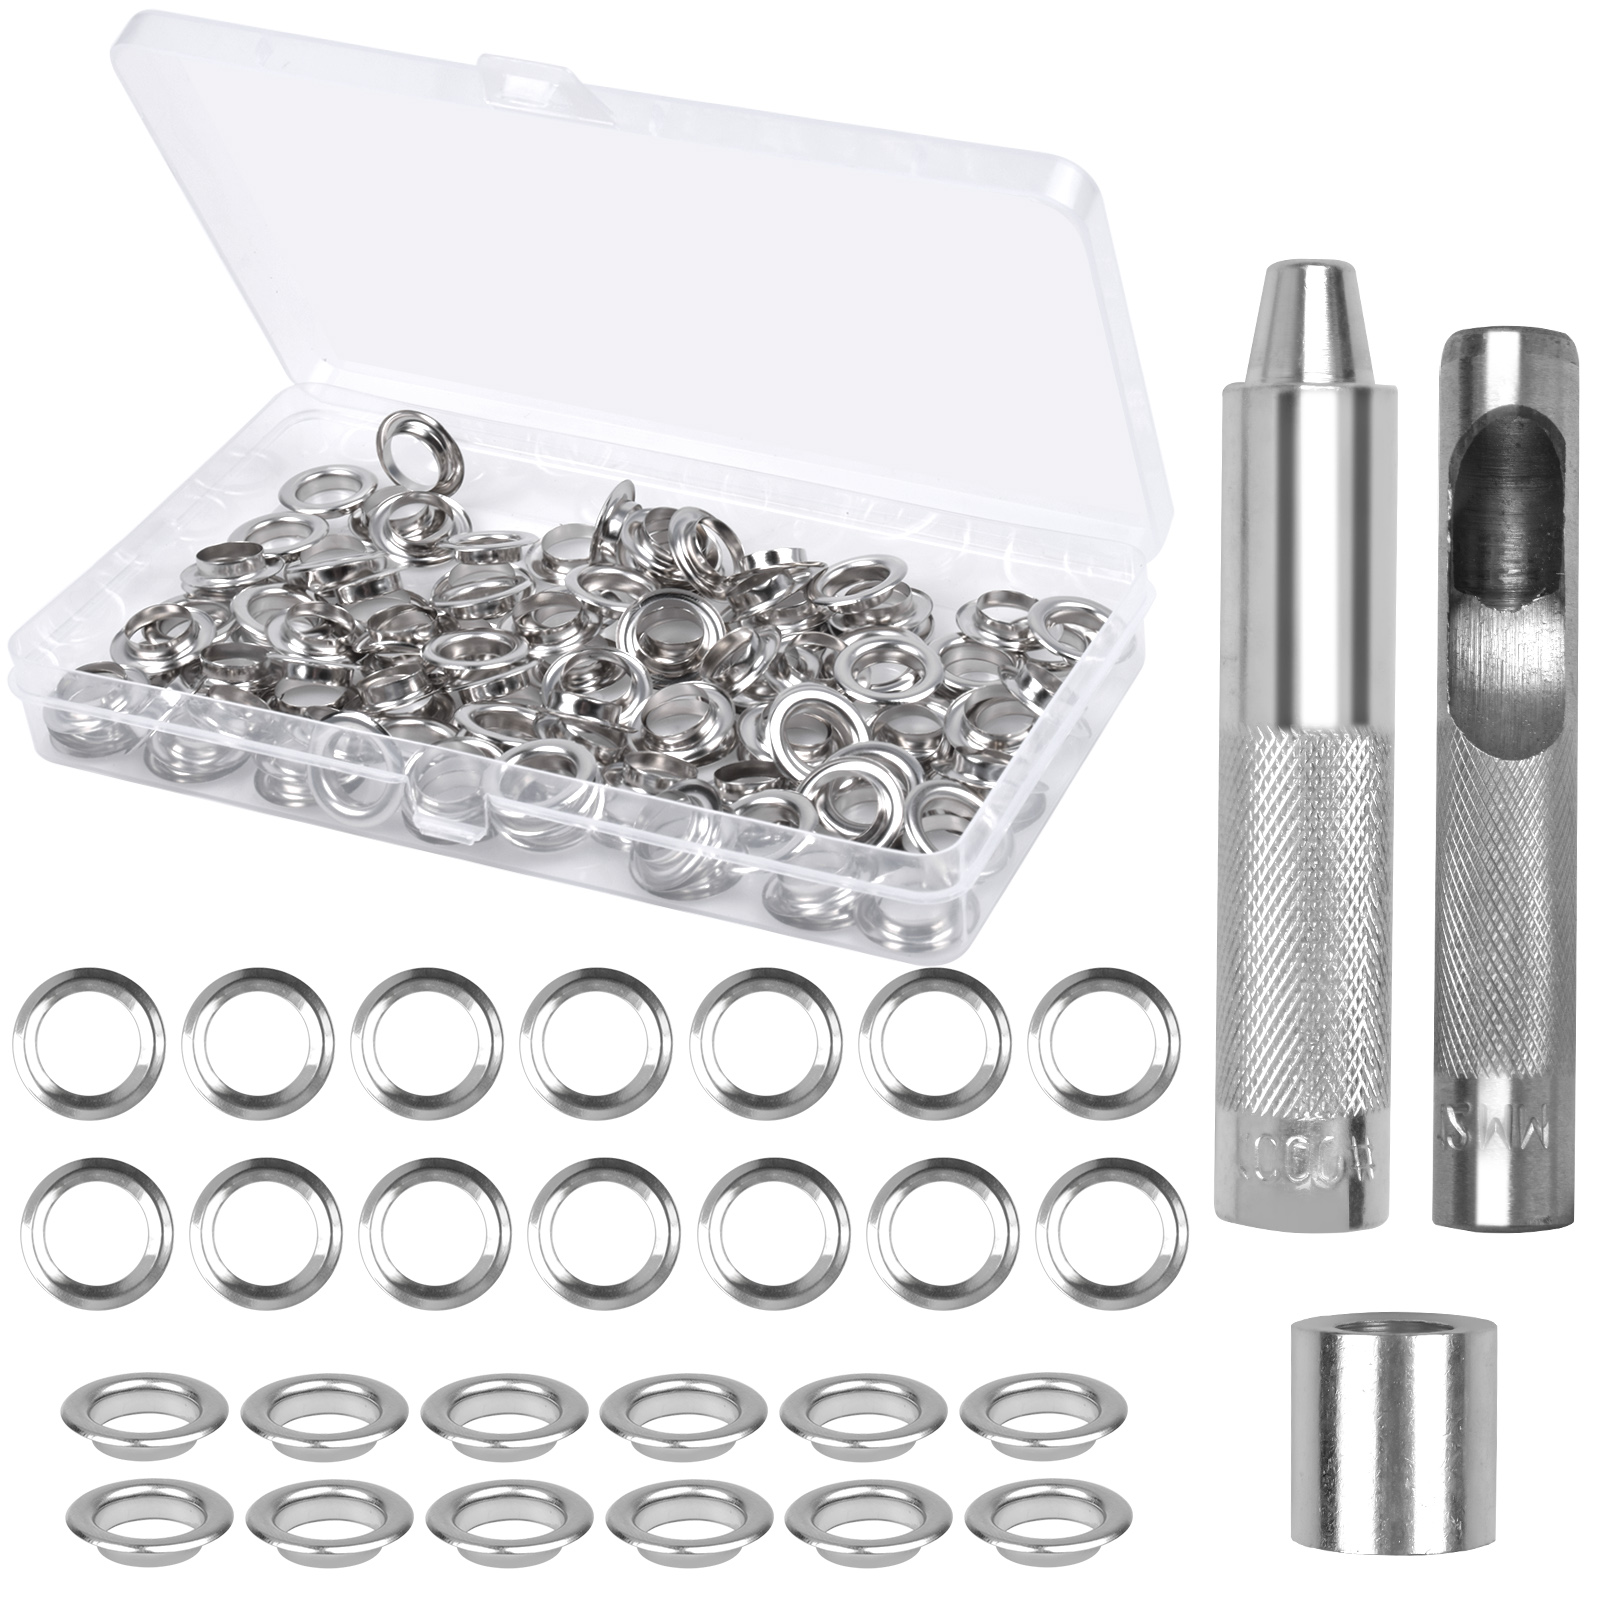  120 Sets Grommet Tool Kit 1/2 Inch, Cridoz Grommet Eyelets Kit  with Setting Tools and Storage Box for Fabric, Tarps, Curtains : Arts,  Crafts & Sewing